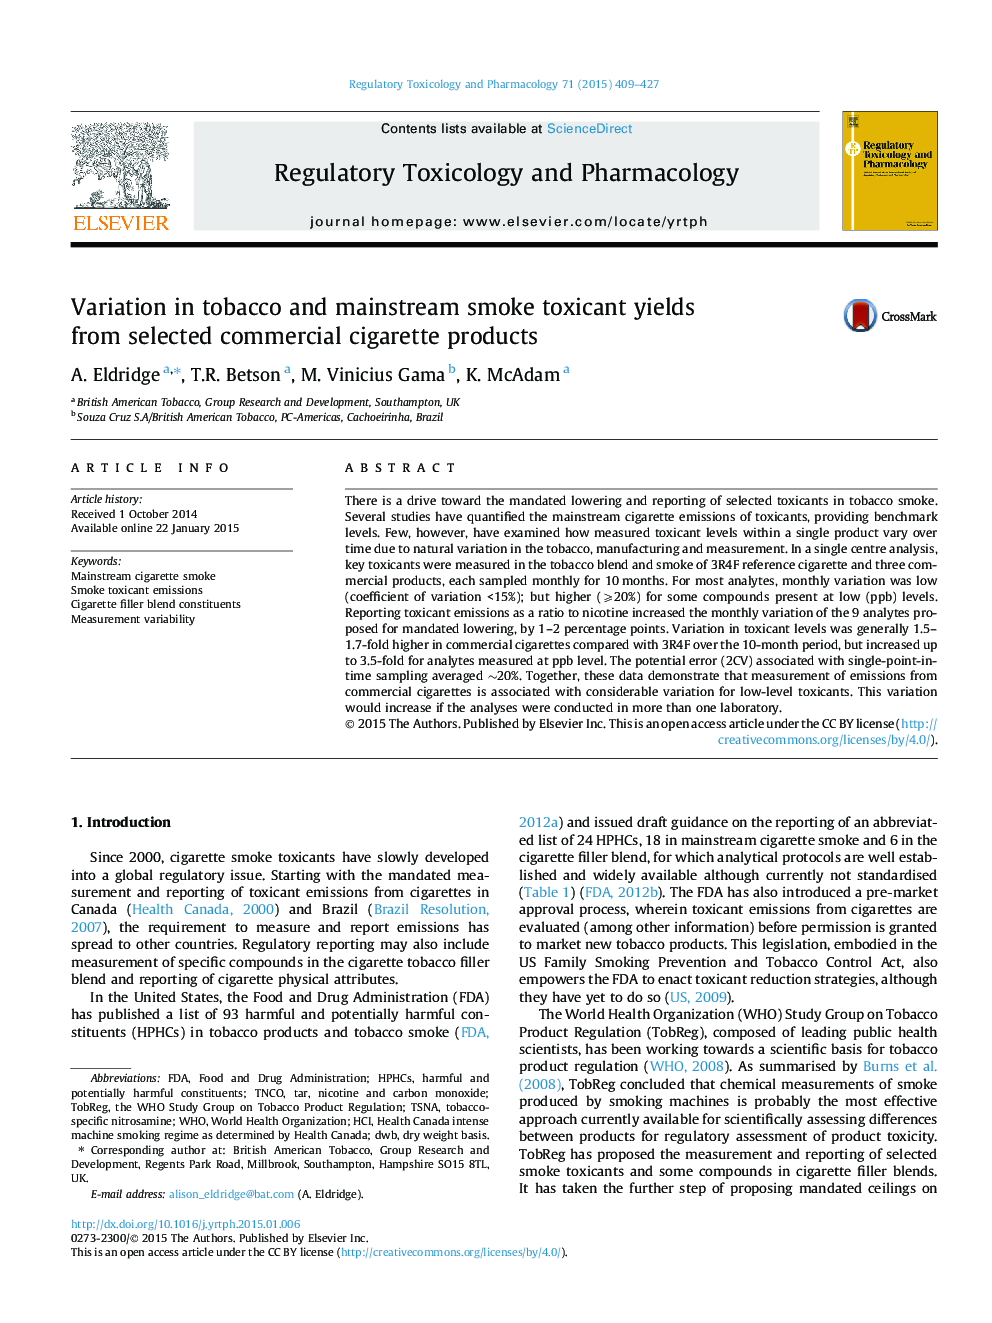 Variation in tobacco and mainstream smoke toxicant yields from selected commercial cigarette products